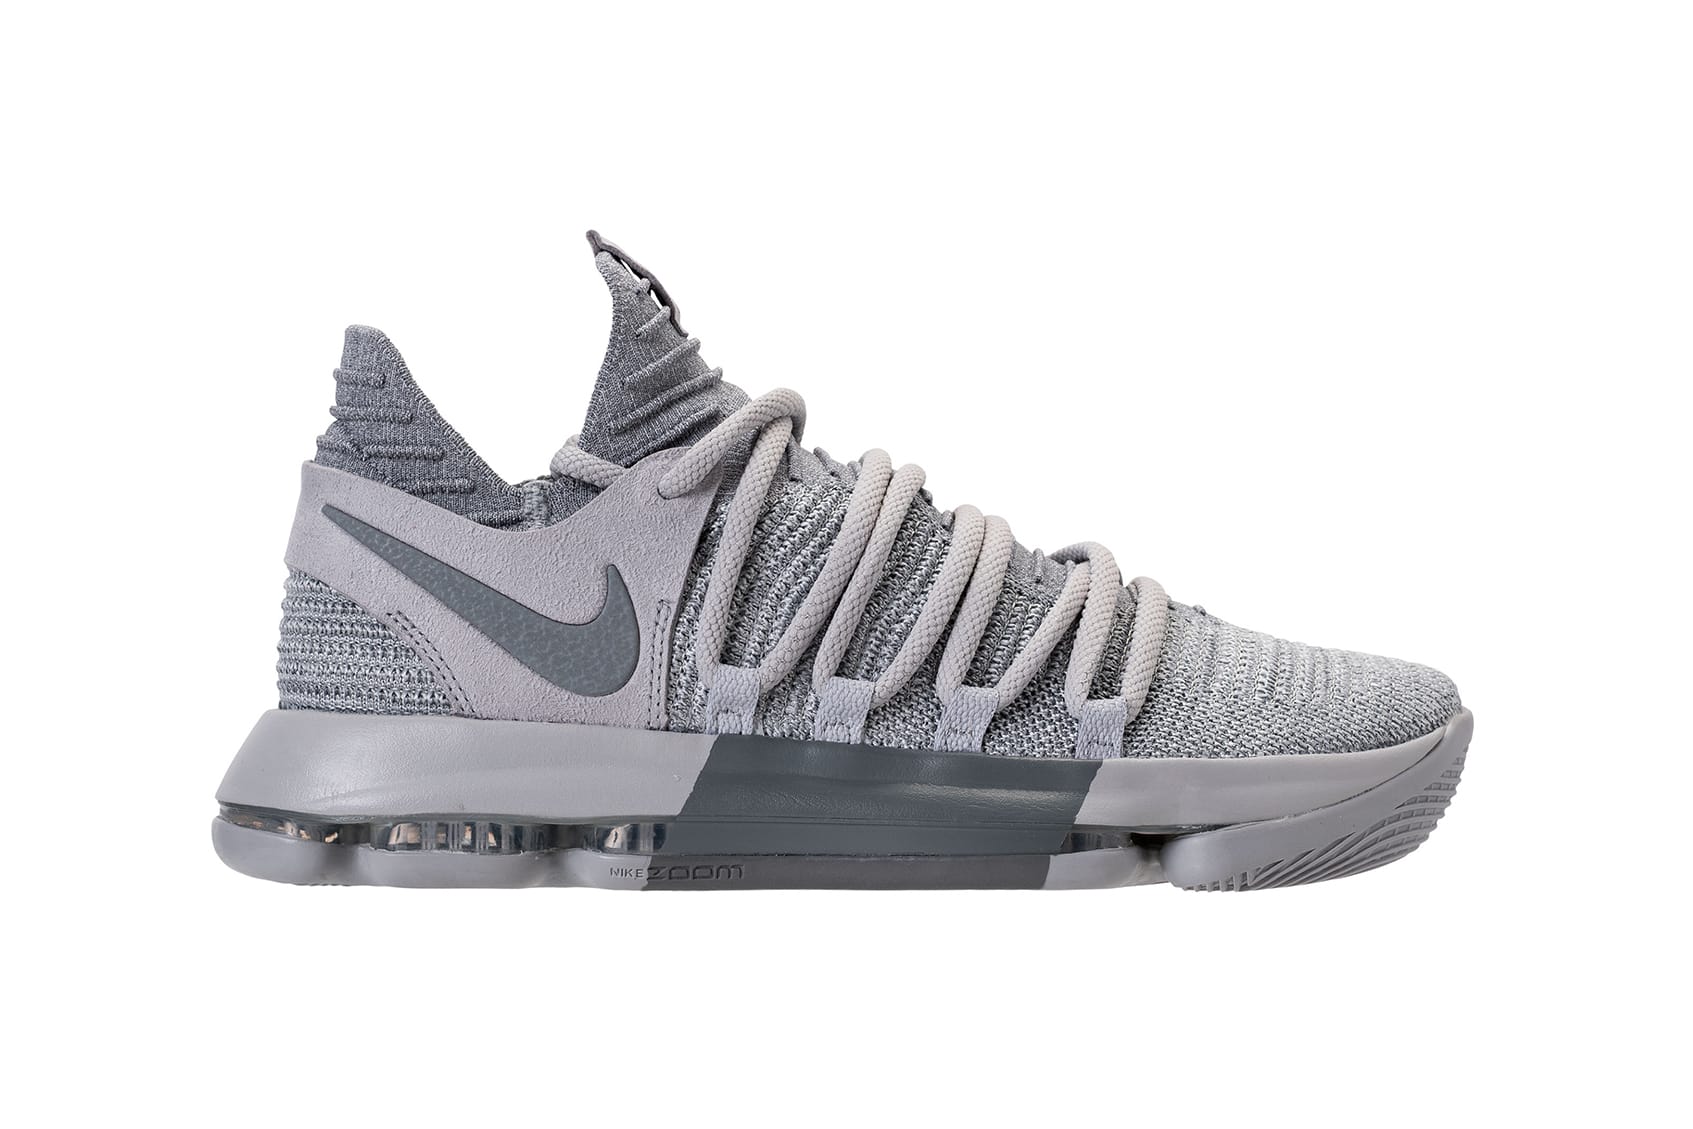 Nike KD 10 Gray Set To Release in 